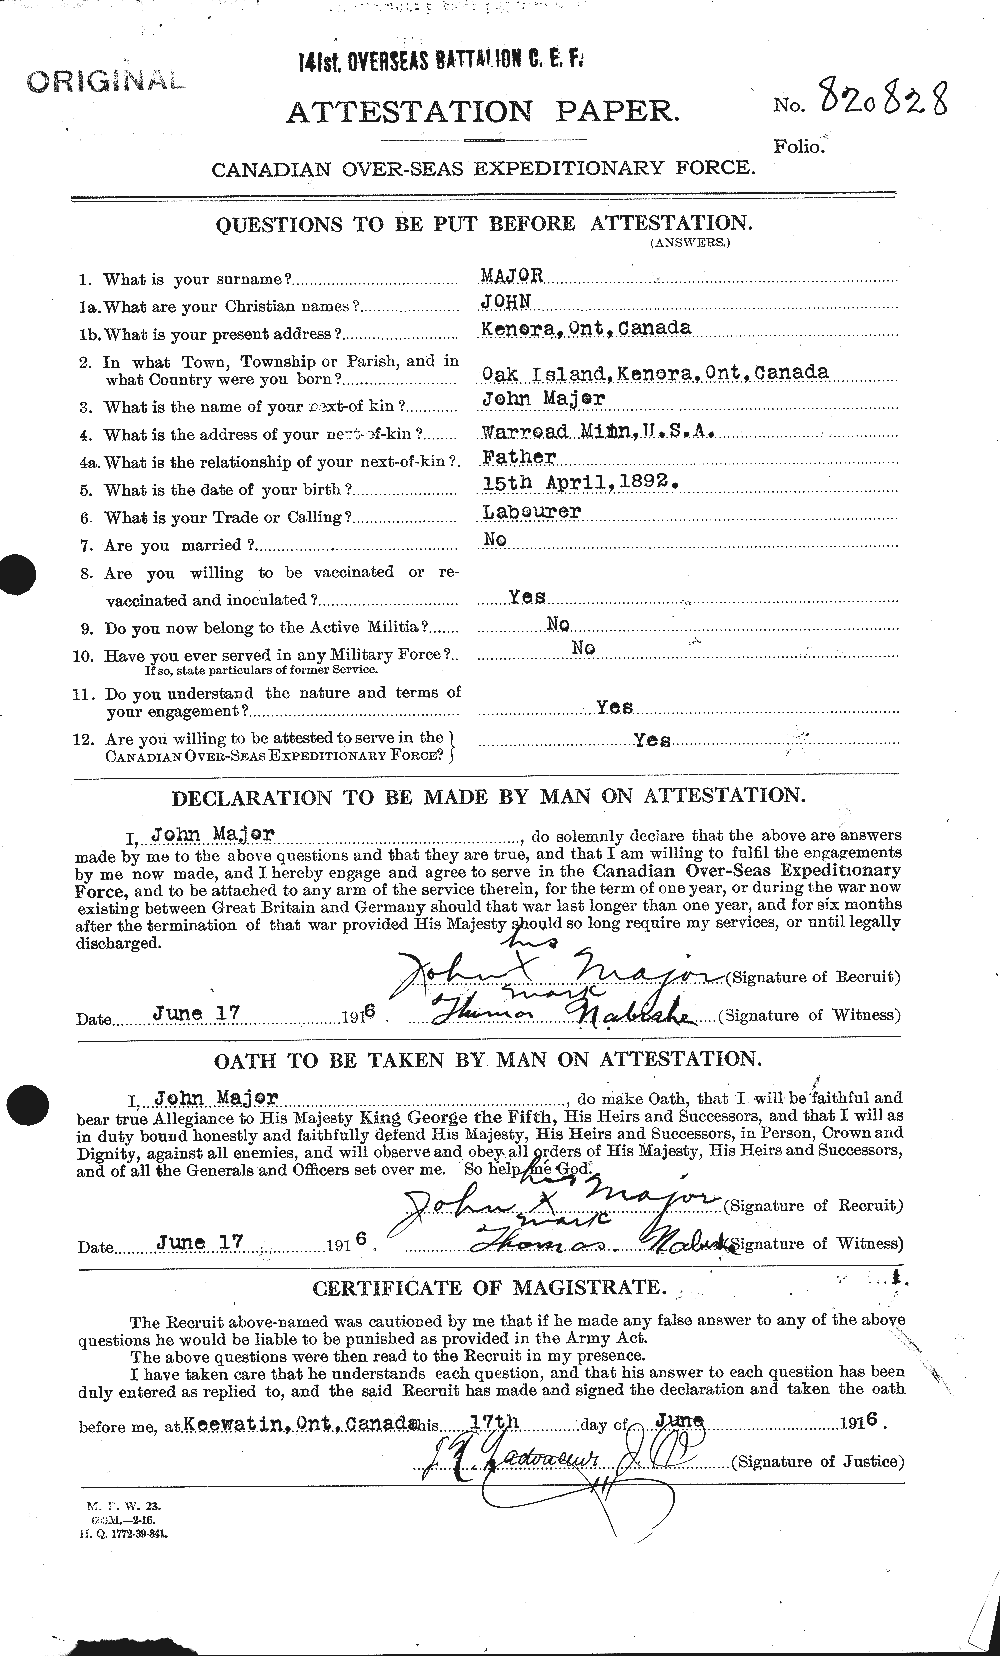 Personnel Records of the First World War - CEF 477862a